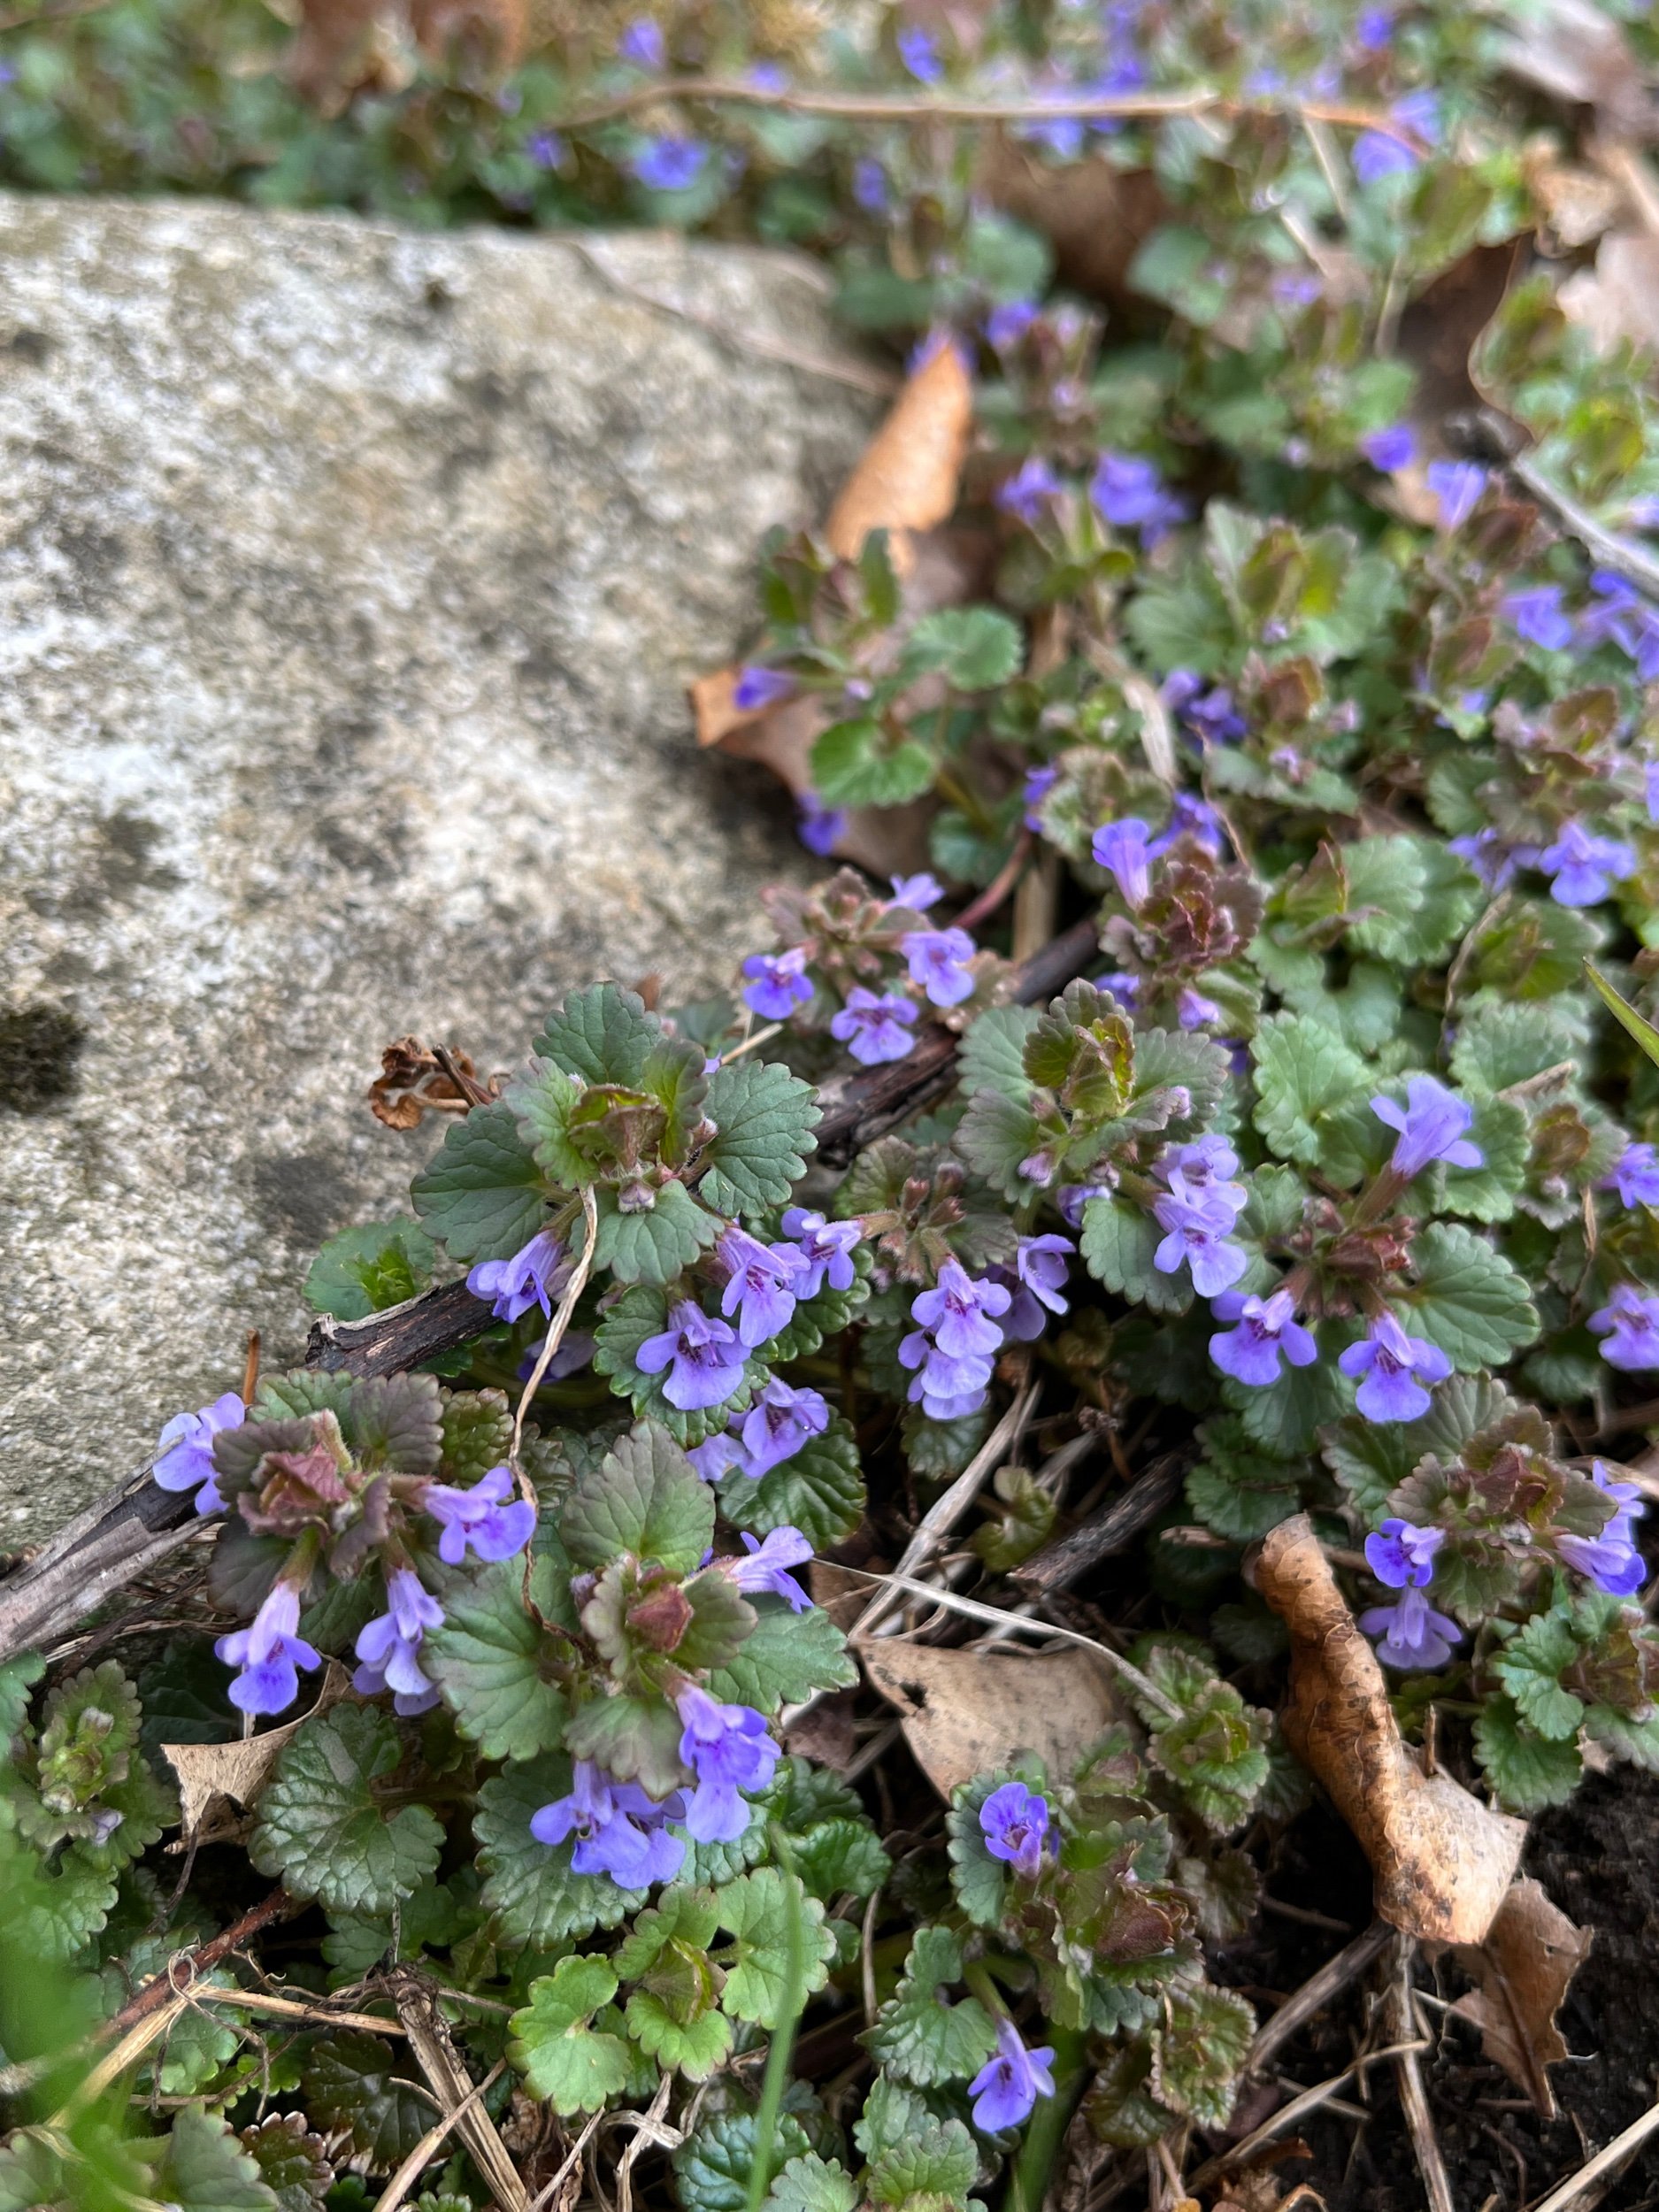  I can’t believe the ground ivy is blooming already! This really is one of the hardiest plants. It is invasive in the garden beds but fills a niche in the rest of the yard where it is too shady for grass to thrive. And the pollinators love it! 